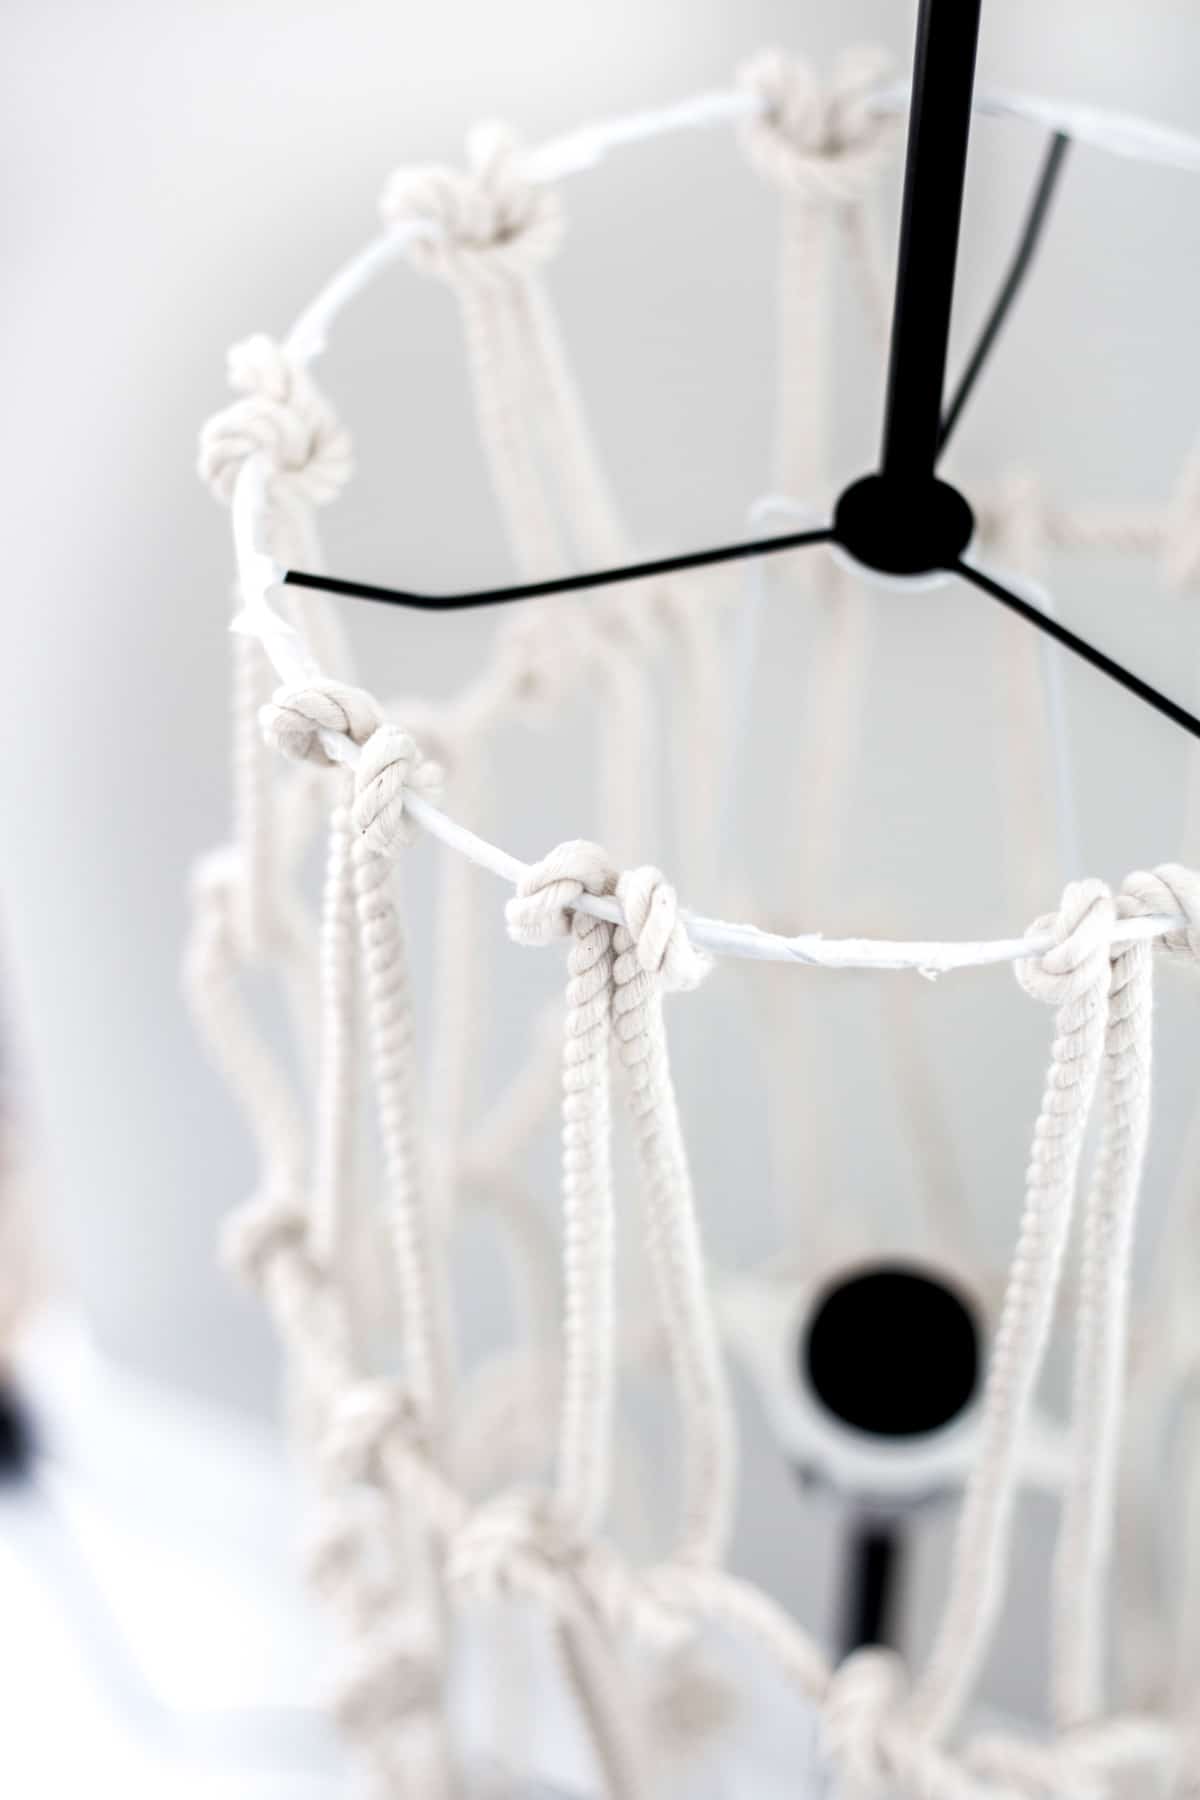 This macrame lamp hack was really pretty simple. The HOLMO lamp can look so boring. Maybe yours needs a little update too!